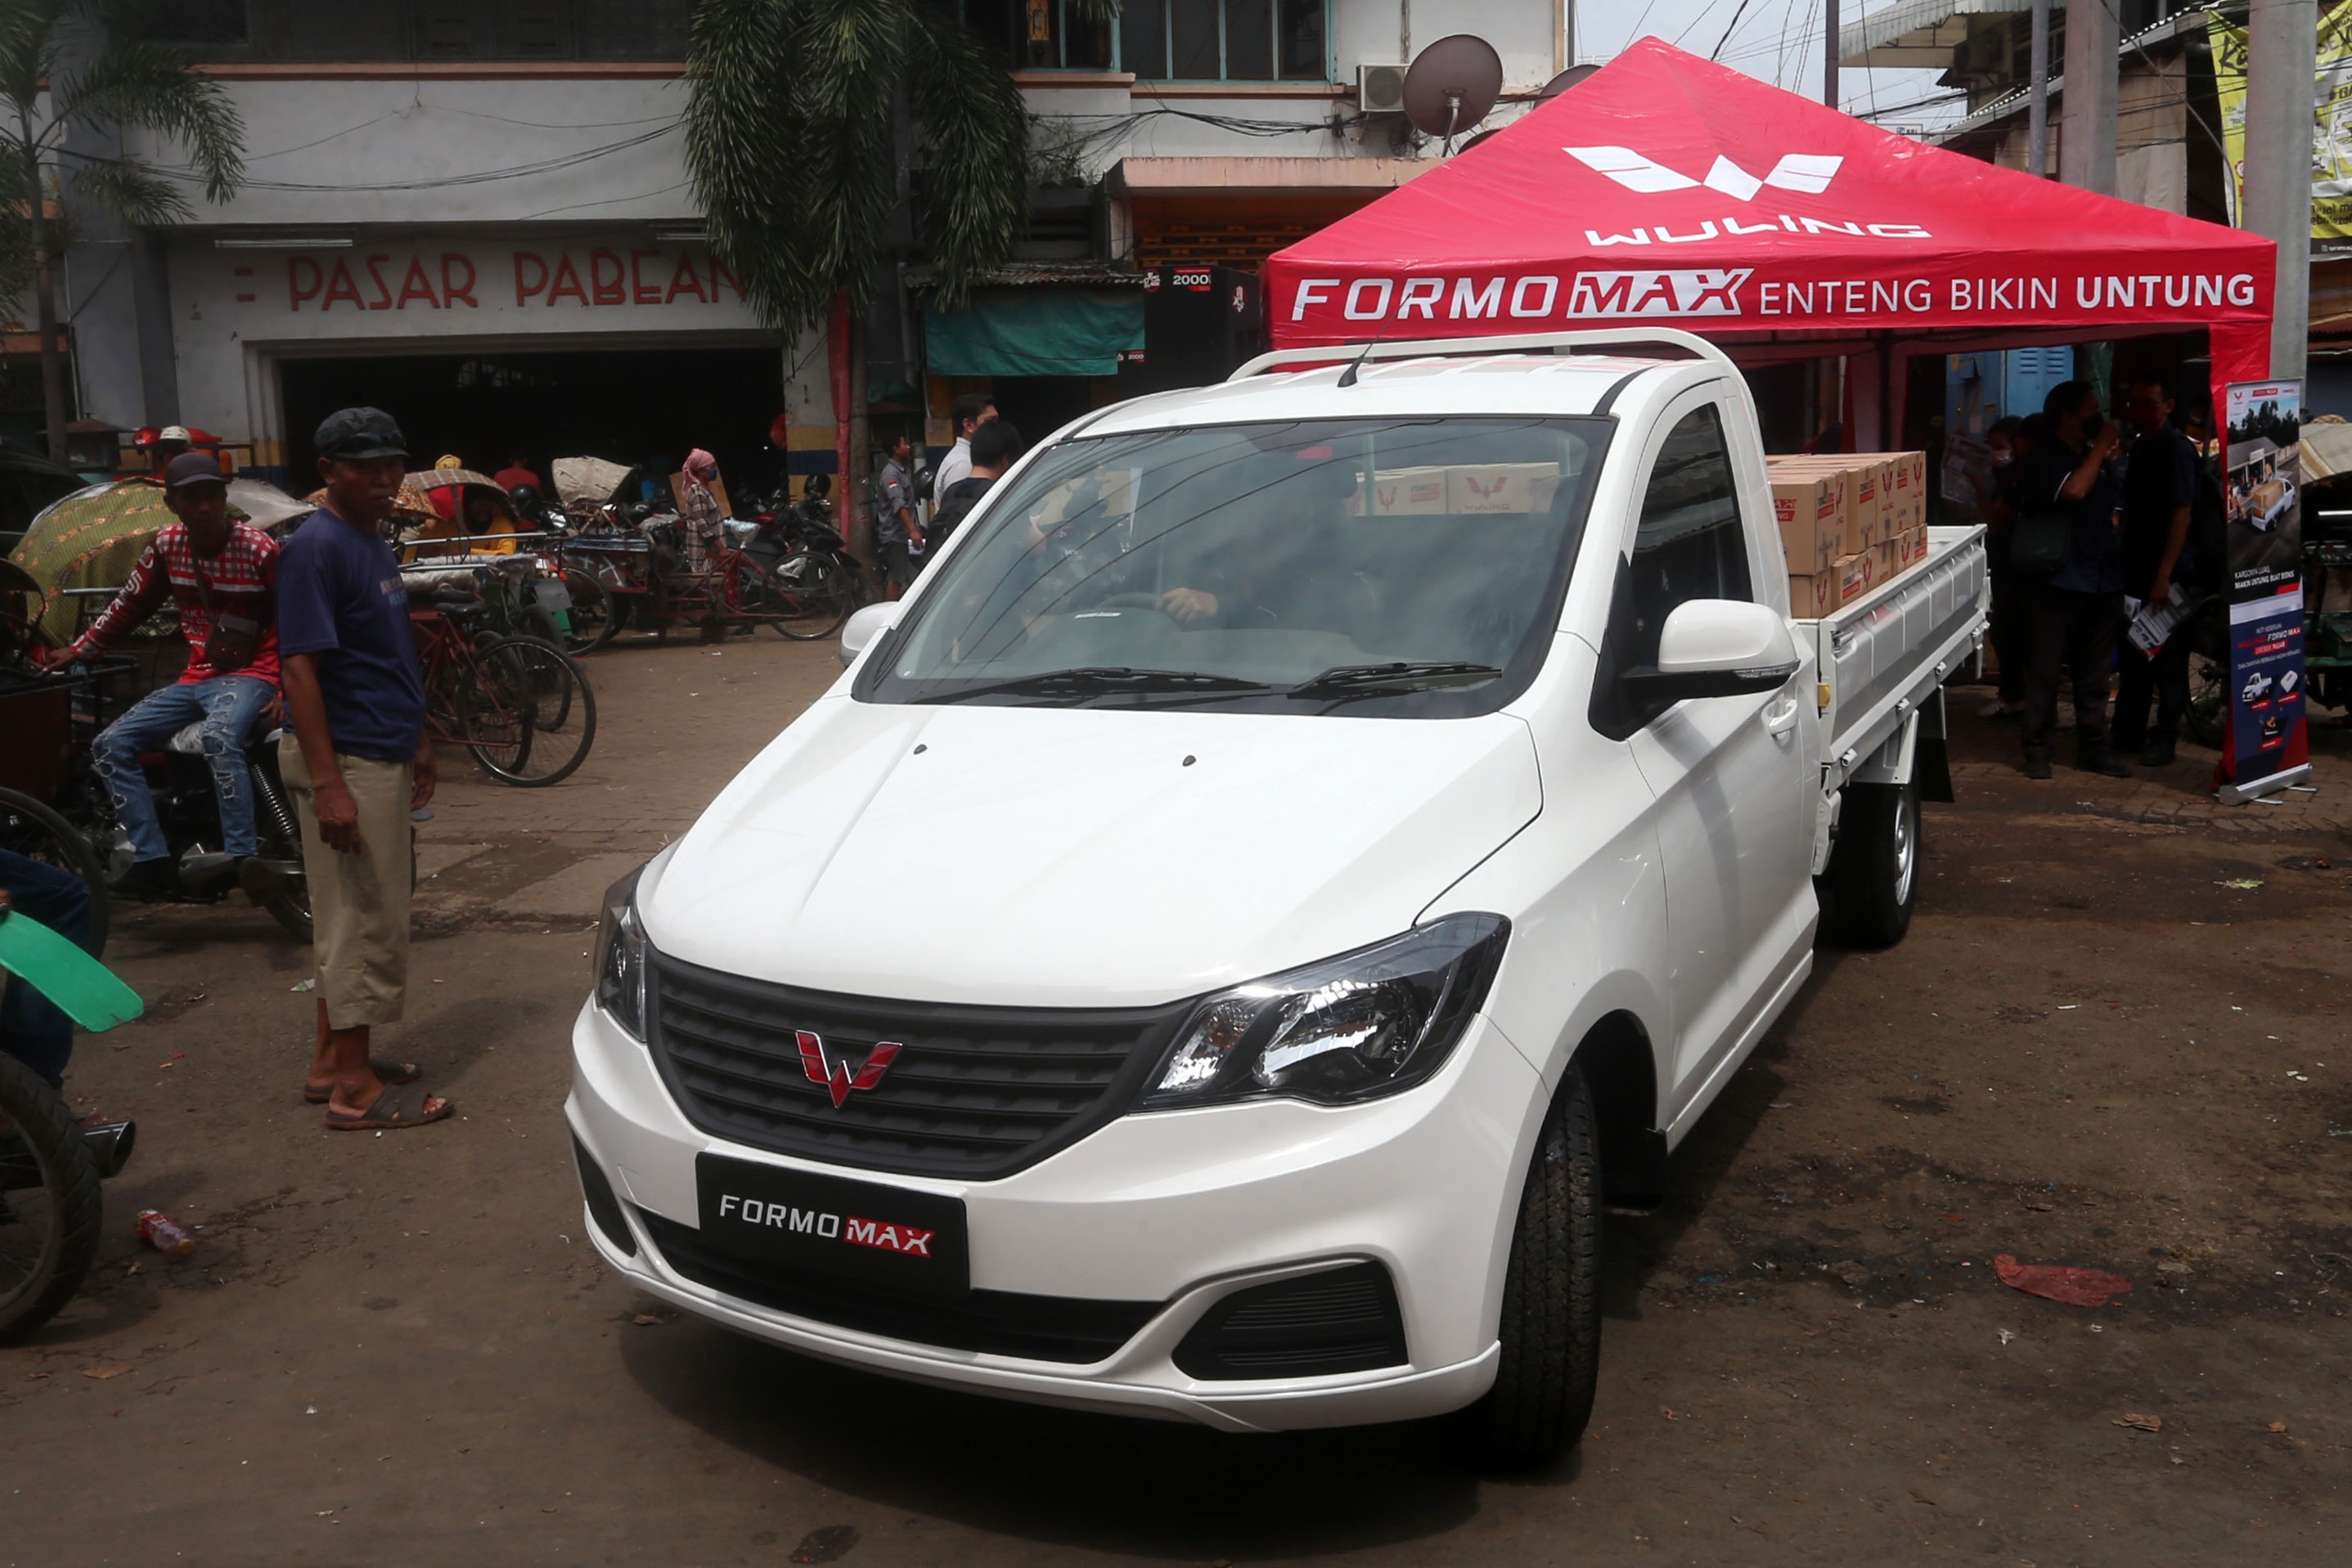 Image Wuling Starts Commercing Formo Max “Enteng Bikin Untung” In The City of Heroes